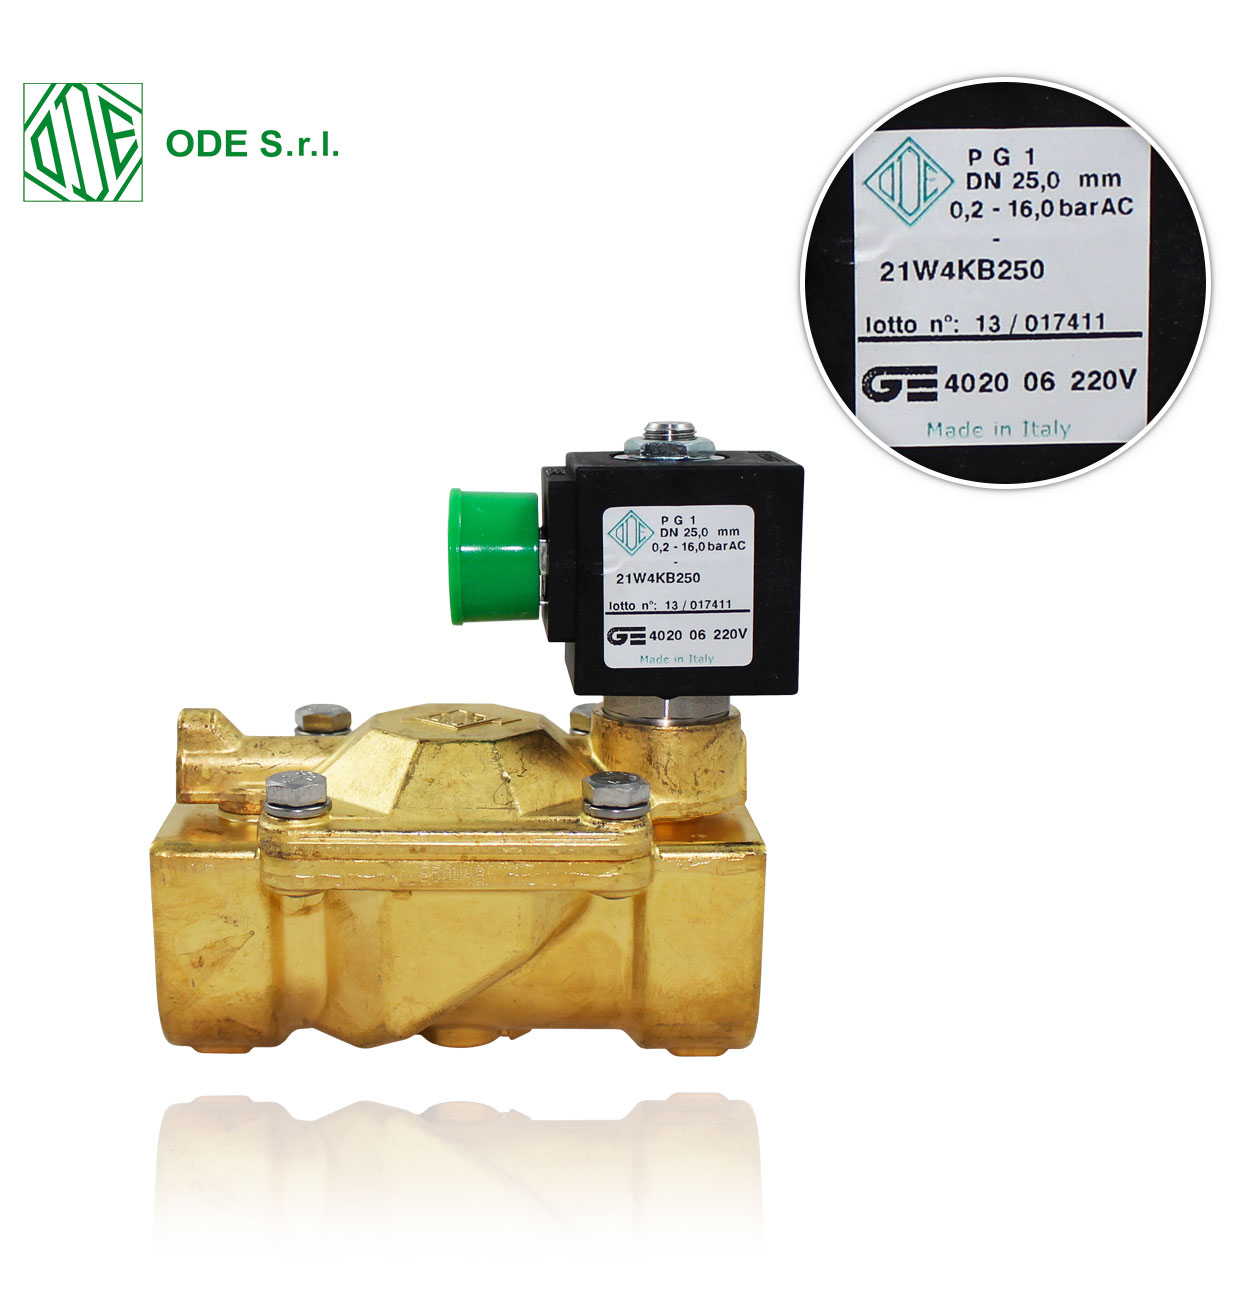 NC R1" 8W 220V/50Hz ODE A indirect acting 2-way SOLENOID VALVE for water